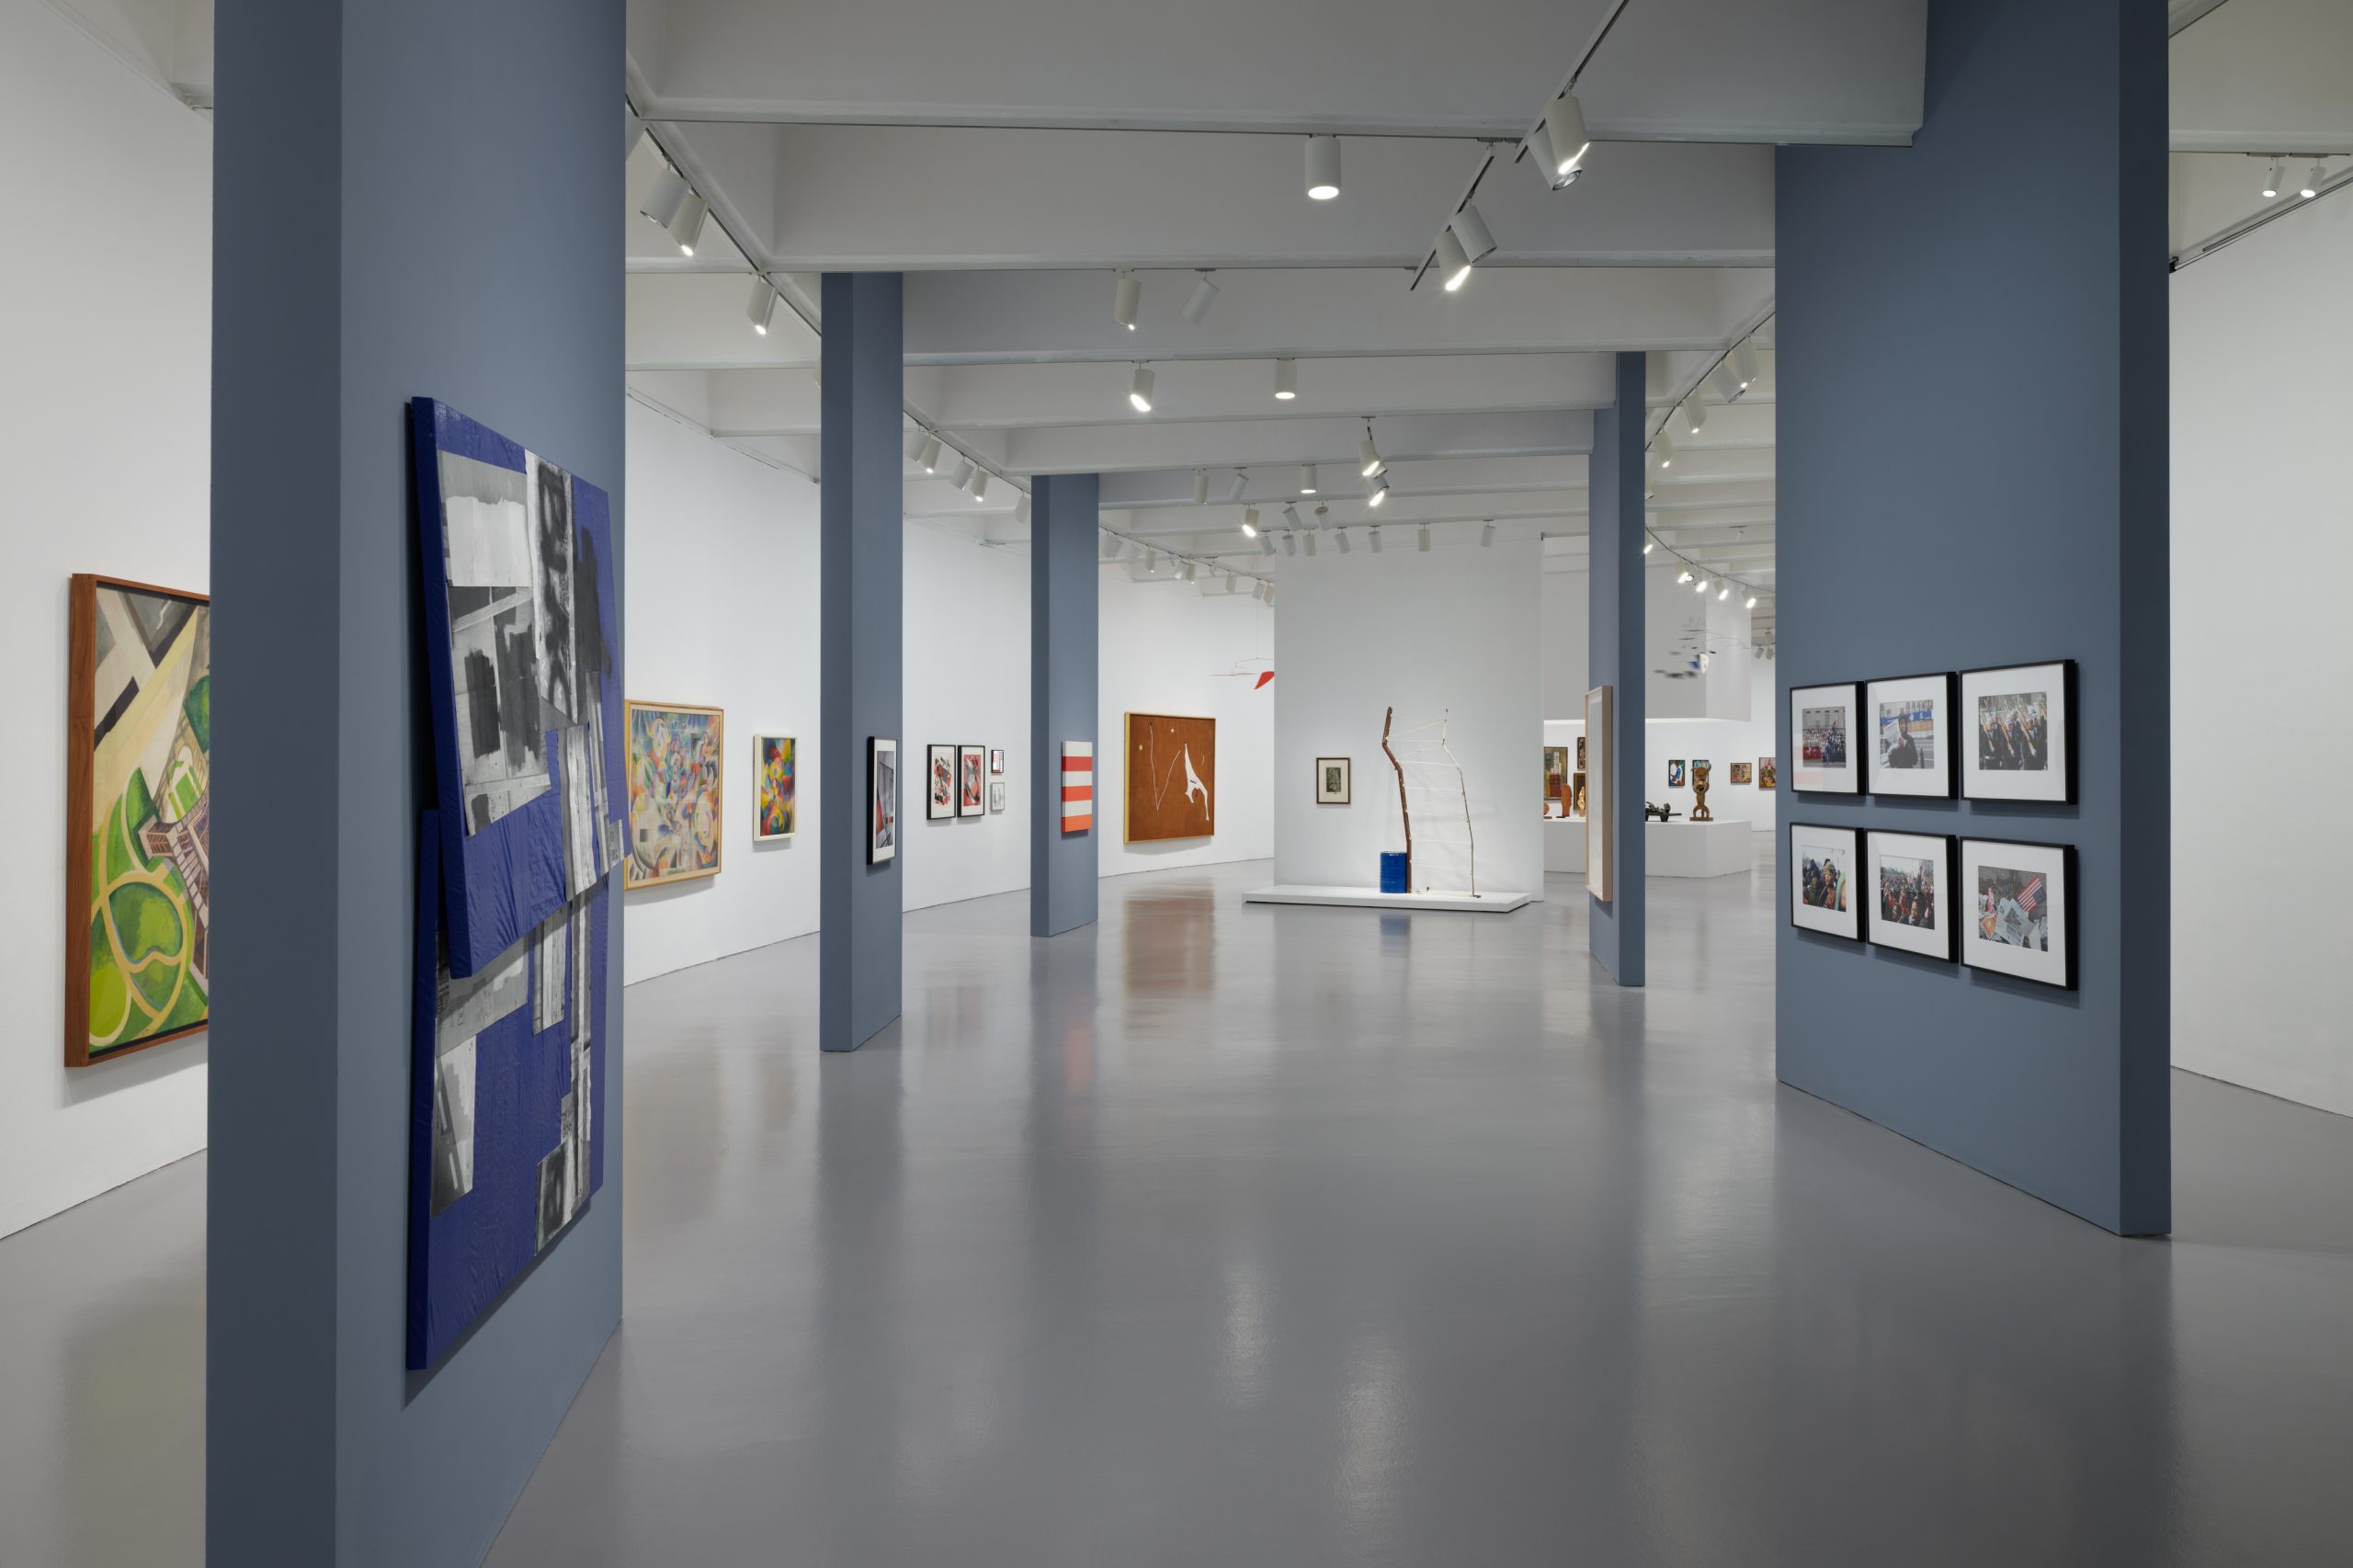 a hallway in the gallery, featuring five blue blade walls with contemporary art on them. The walls surrounding the blade walls feature colorful modern art.